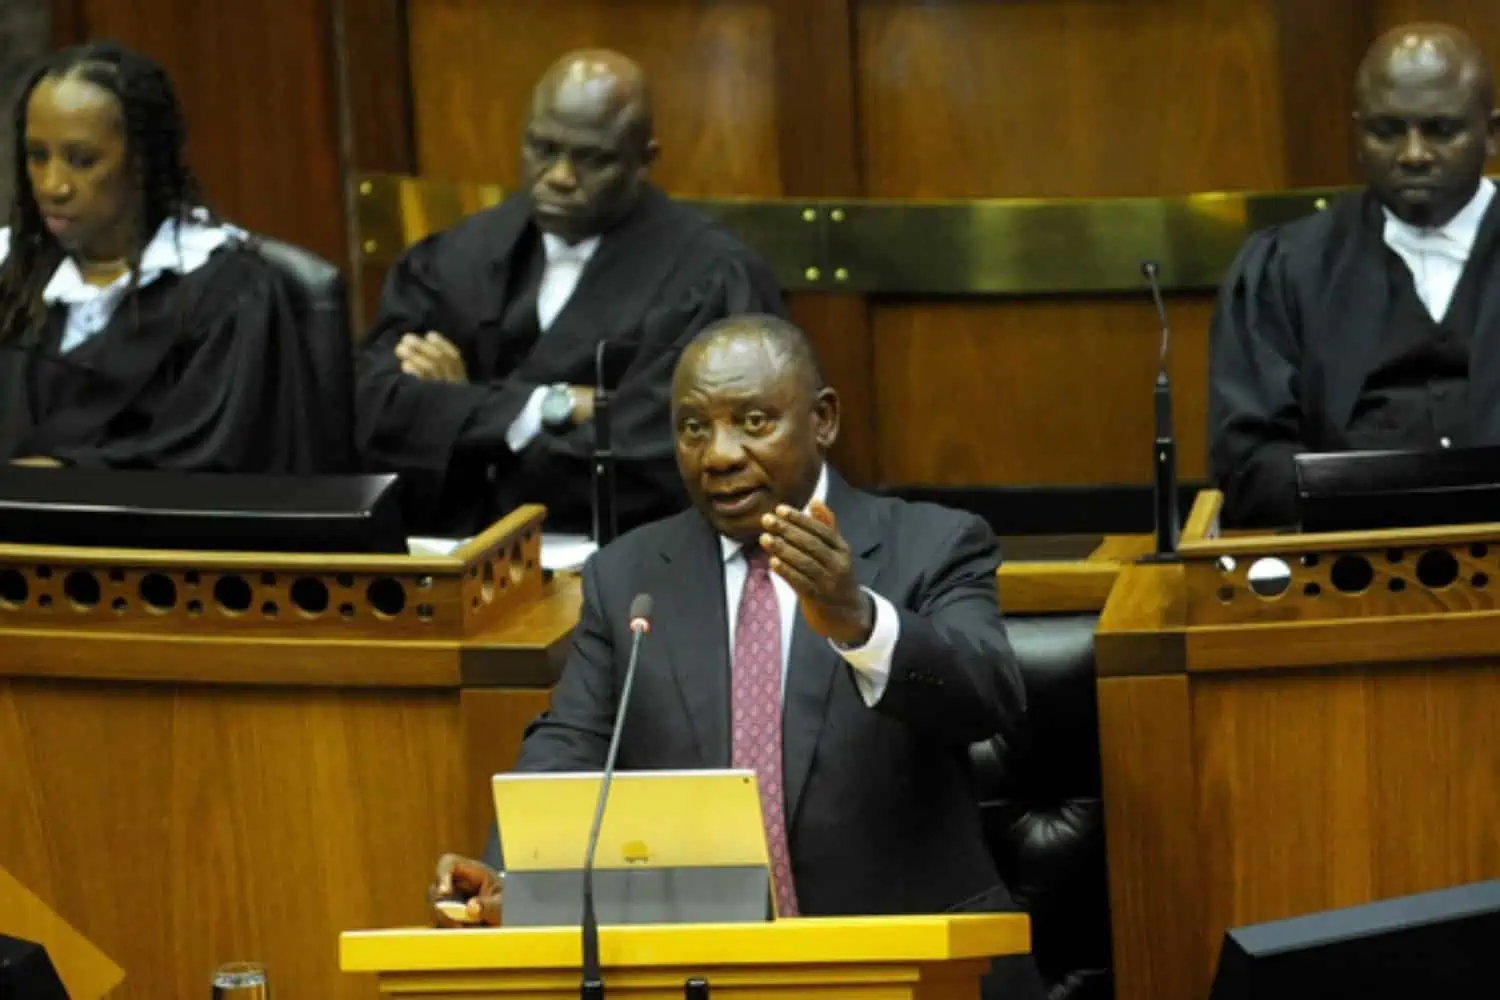 TODAY South Africa's Top News for 15 February 2022 - Ramphosa in hot seat after post-SONA debate